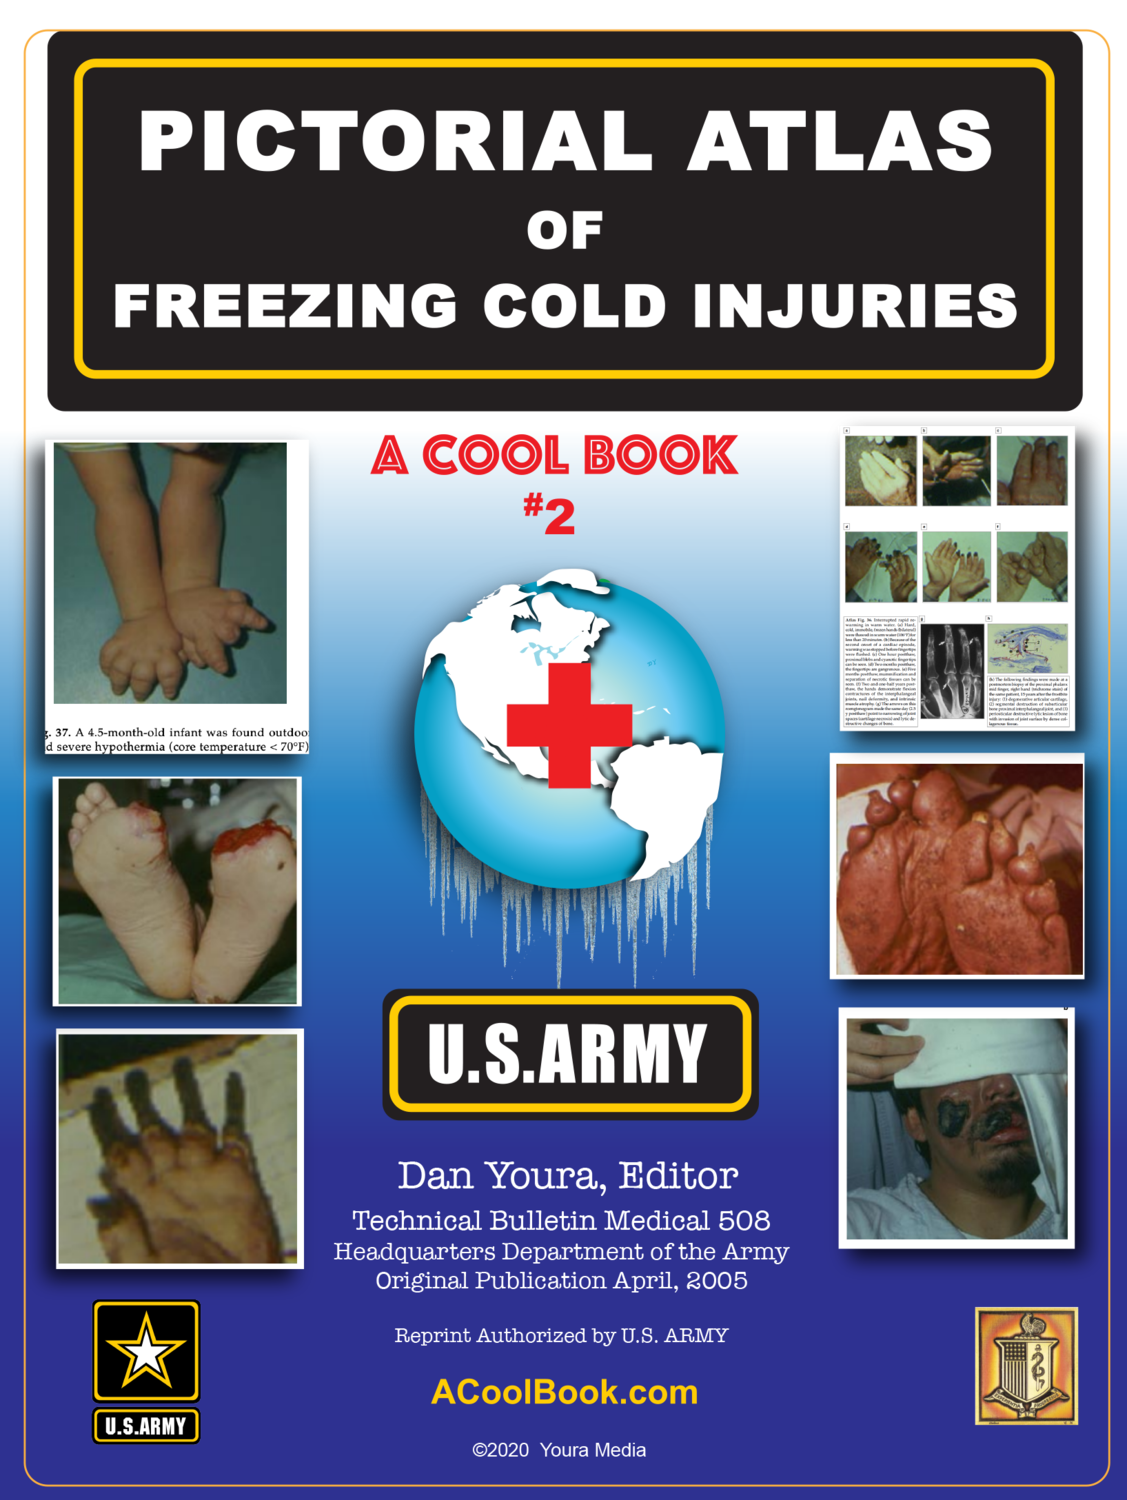 #1 Pictorial Atlas of Freezing Cold Injuries BOOK# 2 –– Download $2.00